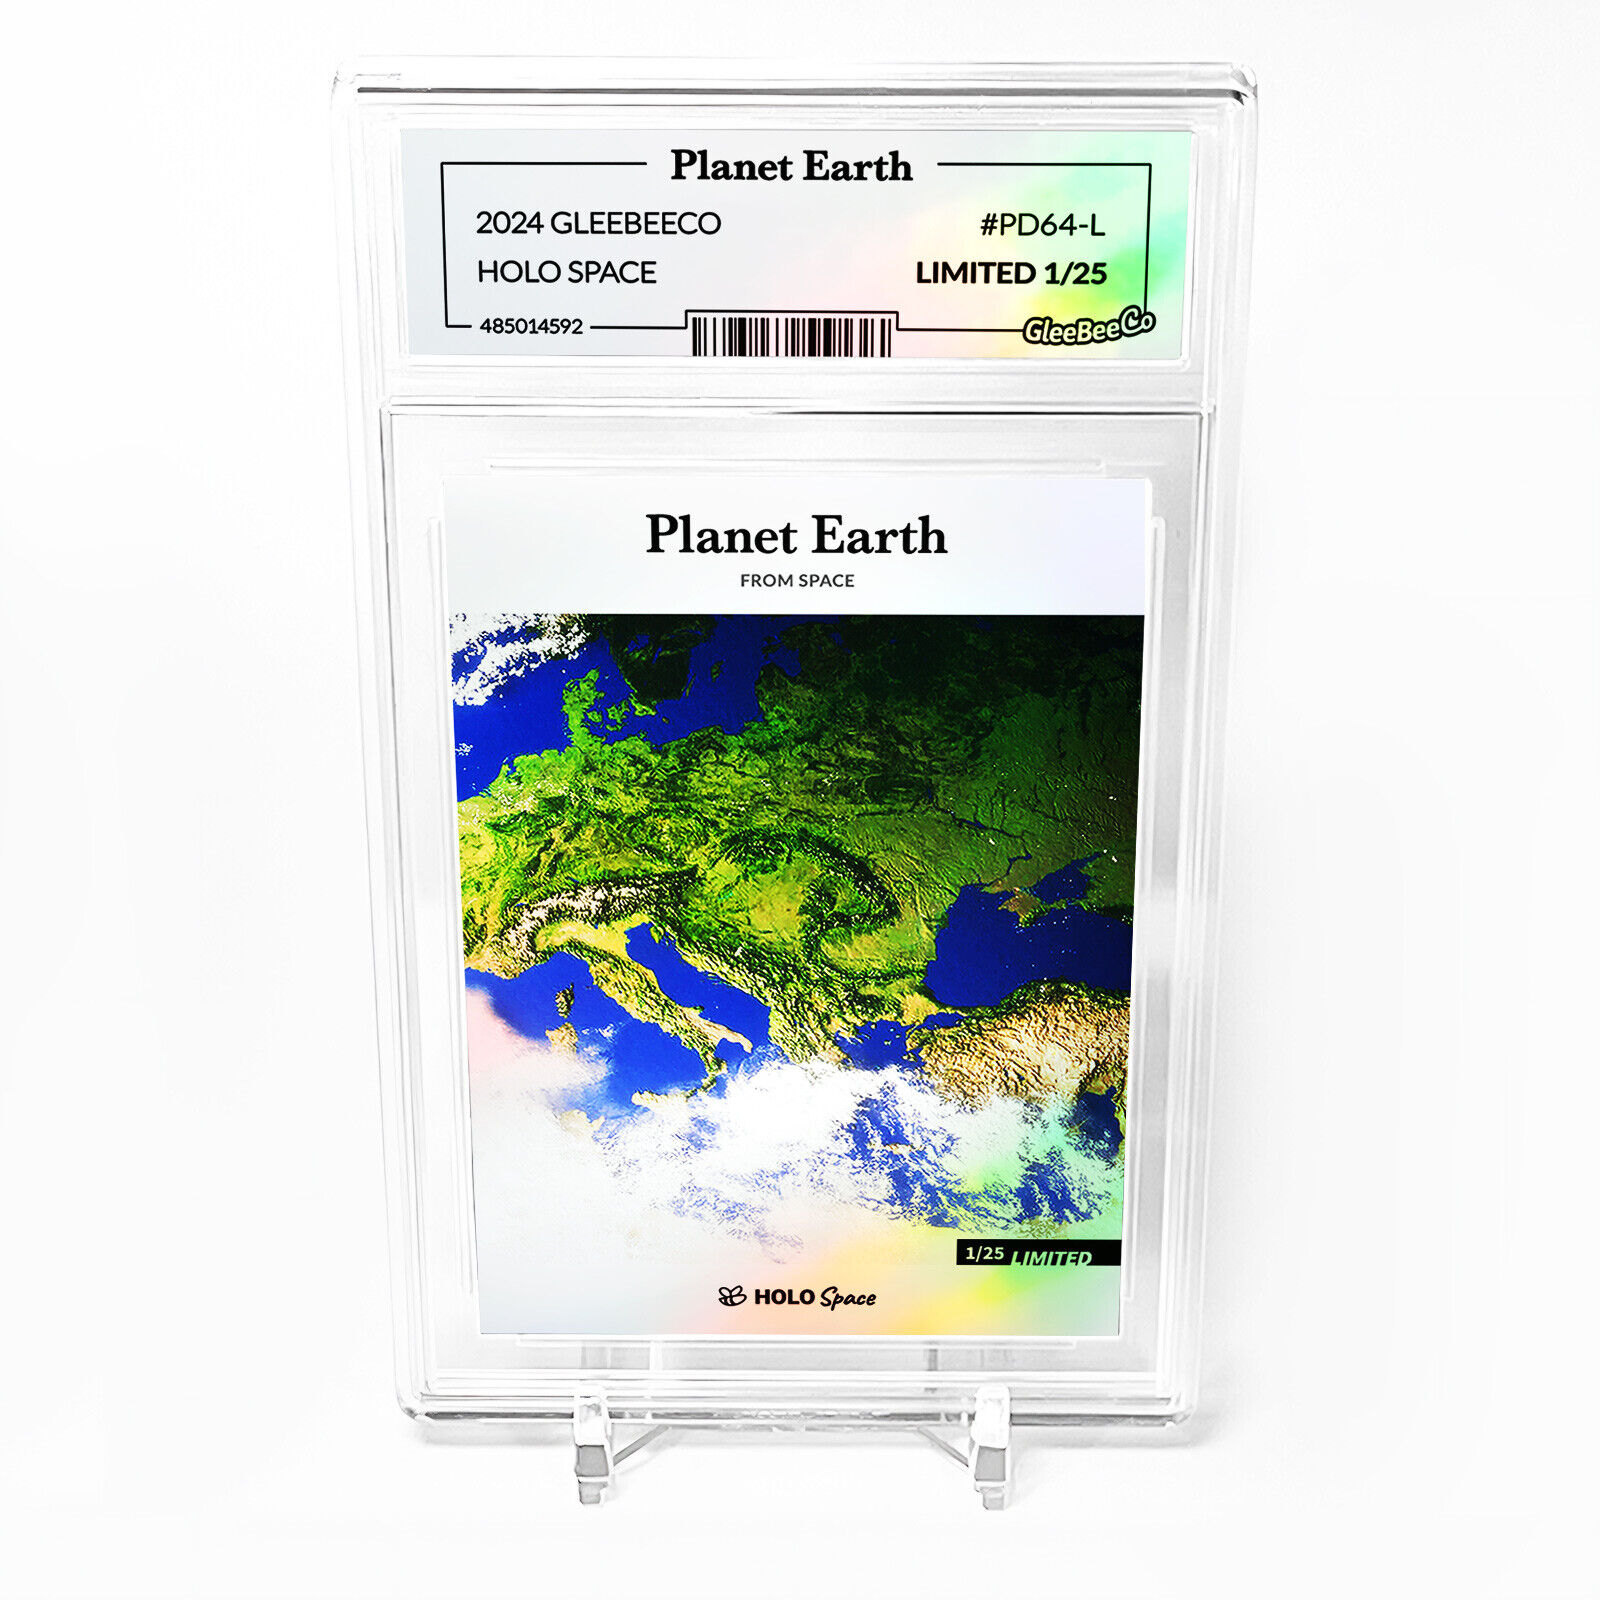 PLANET EARTH From Space Card 2024 GleeBeeCo Holographic #PD64-L /25